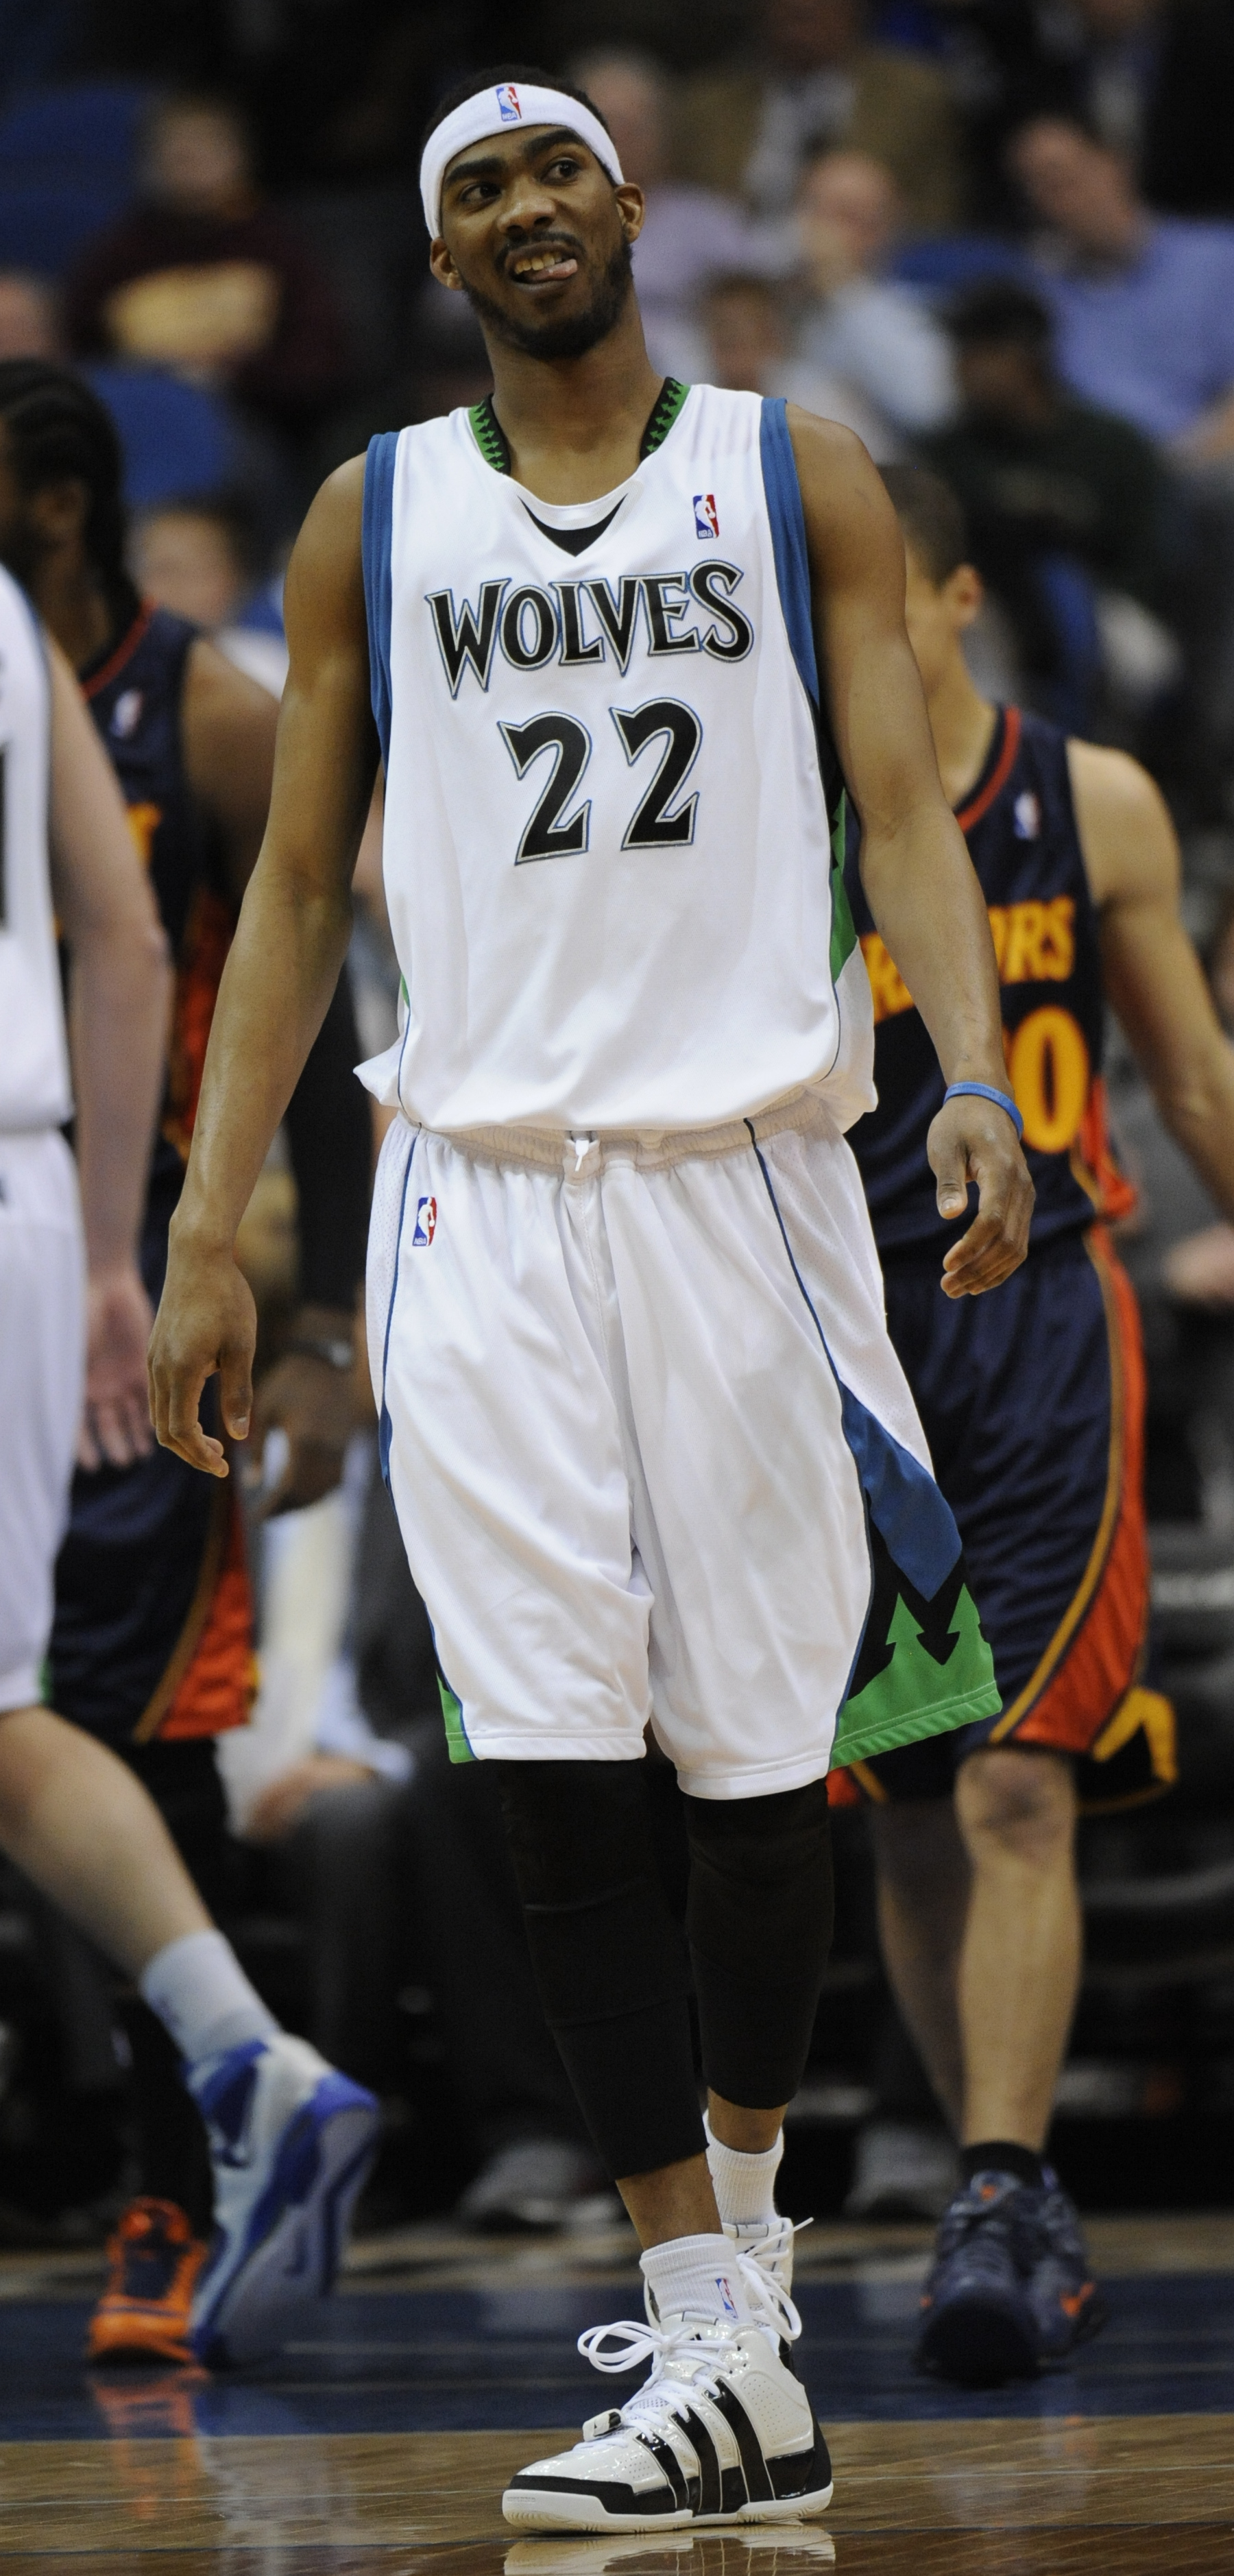 MINNEAPOLIS, MN - APRIL 7: Corey Brewer #22 of Minnesota Timberwolves reacts to a call in the first half against the Golden State Warriors during a basketball game at Target Center on April 7, 2010 in Minneapolis, Minnesota. The Warriors defeated the Timb